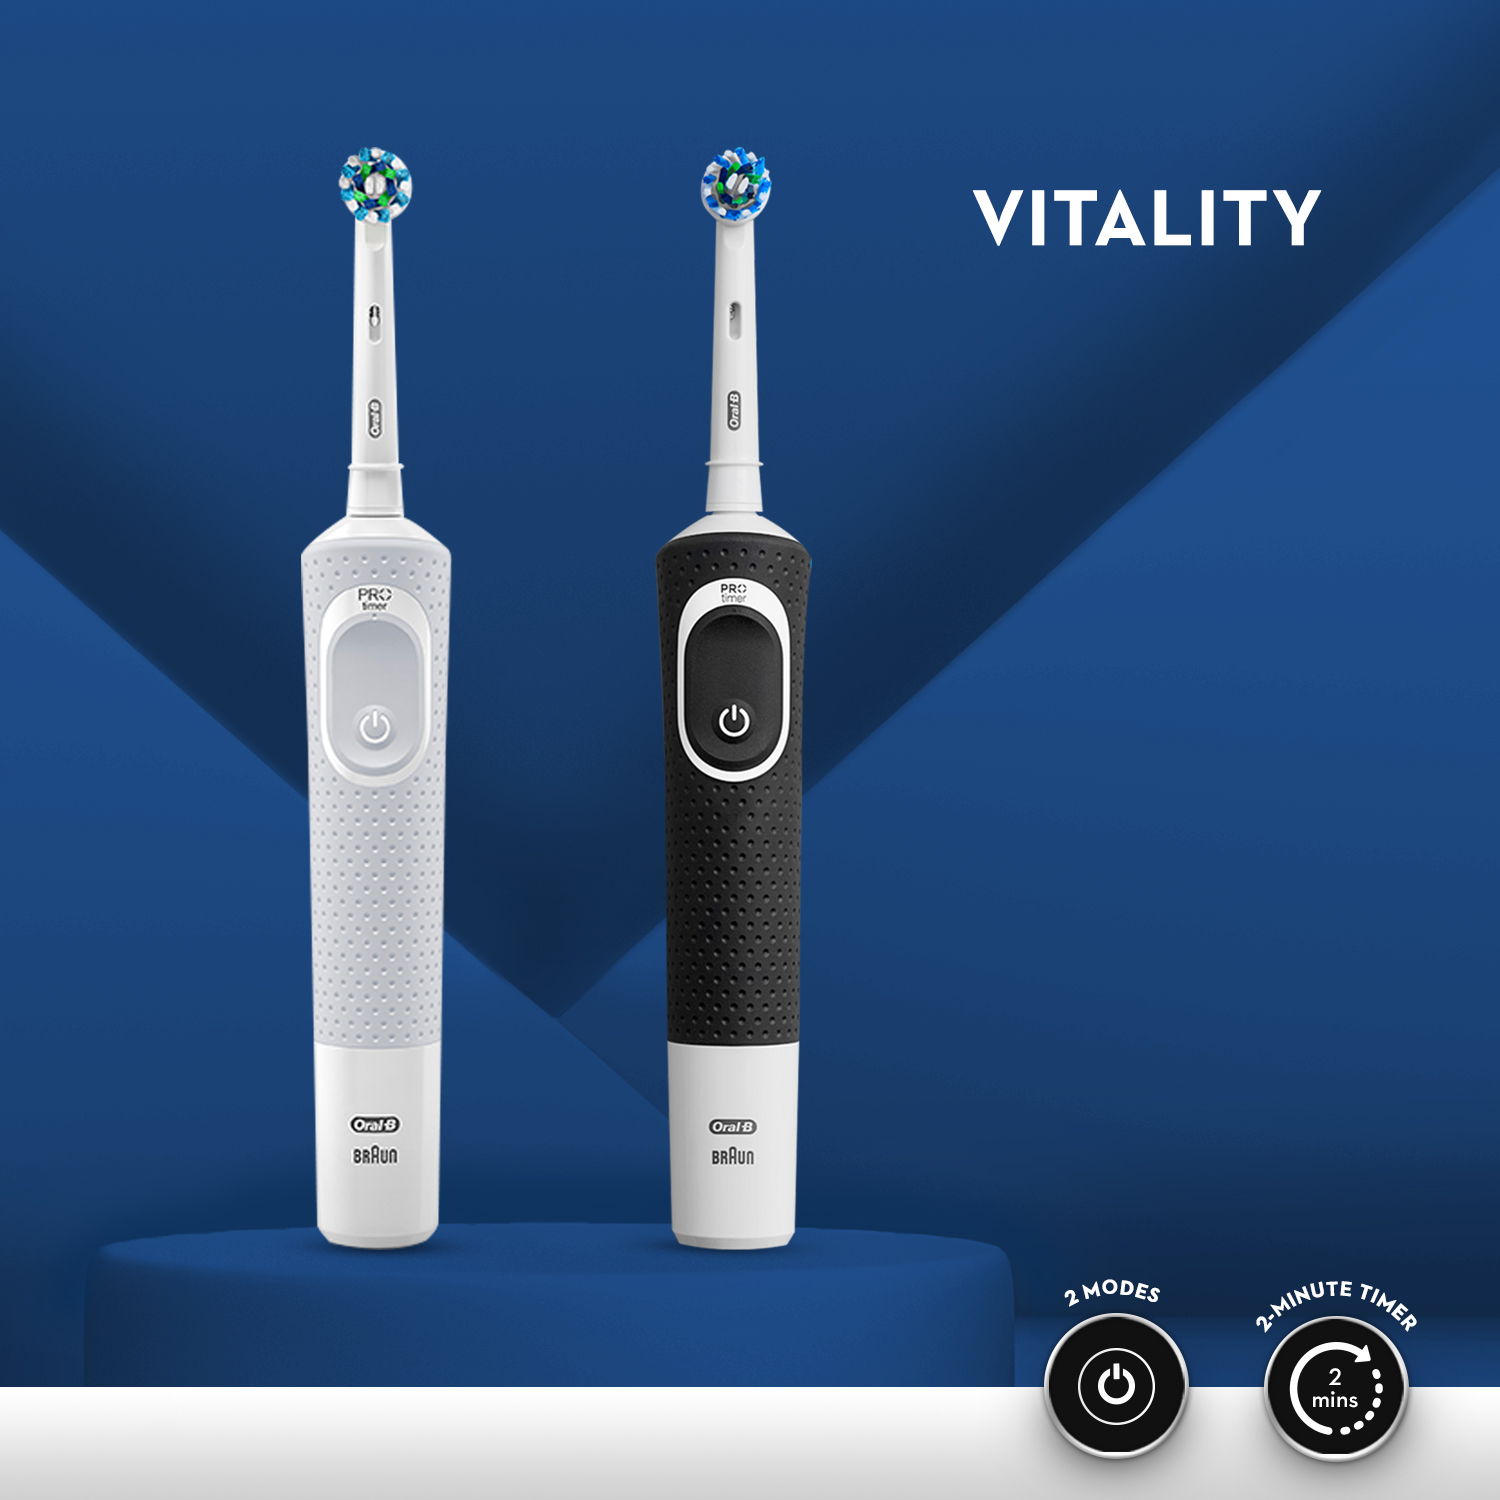 Oral B Vitality 100 Black Criss Cross Electric Rechargeable Toothbrush Powered by Braun and Oral B